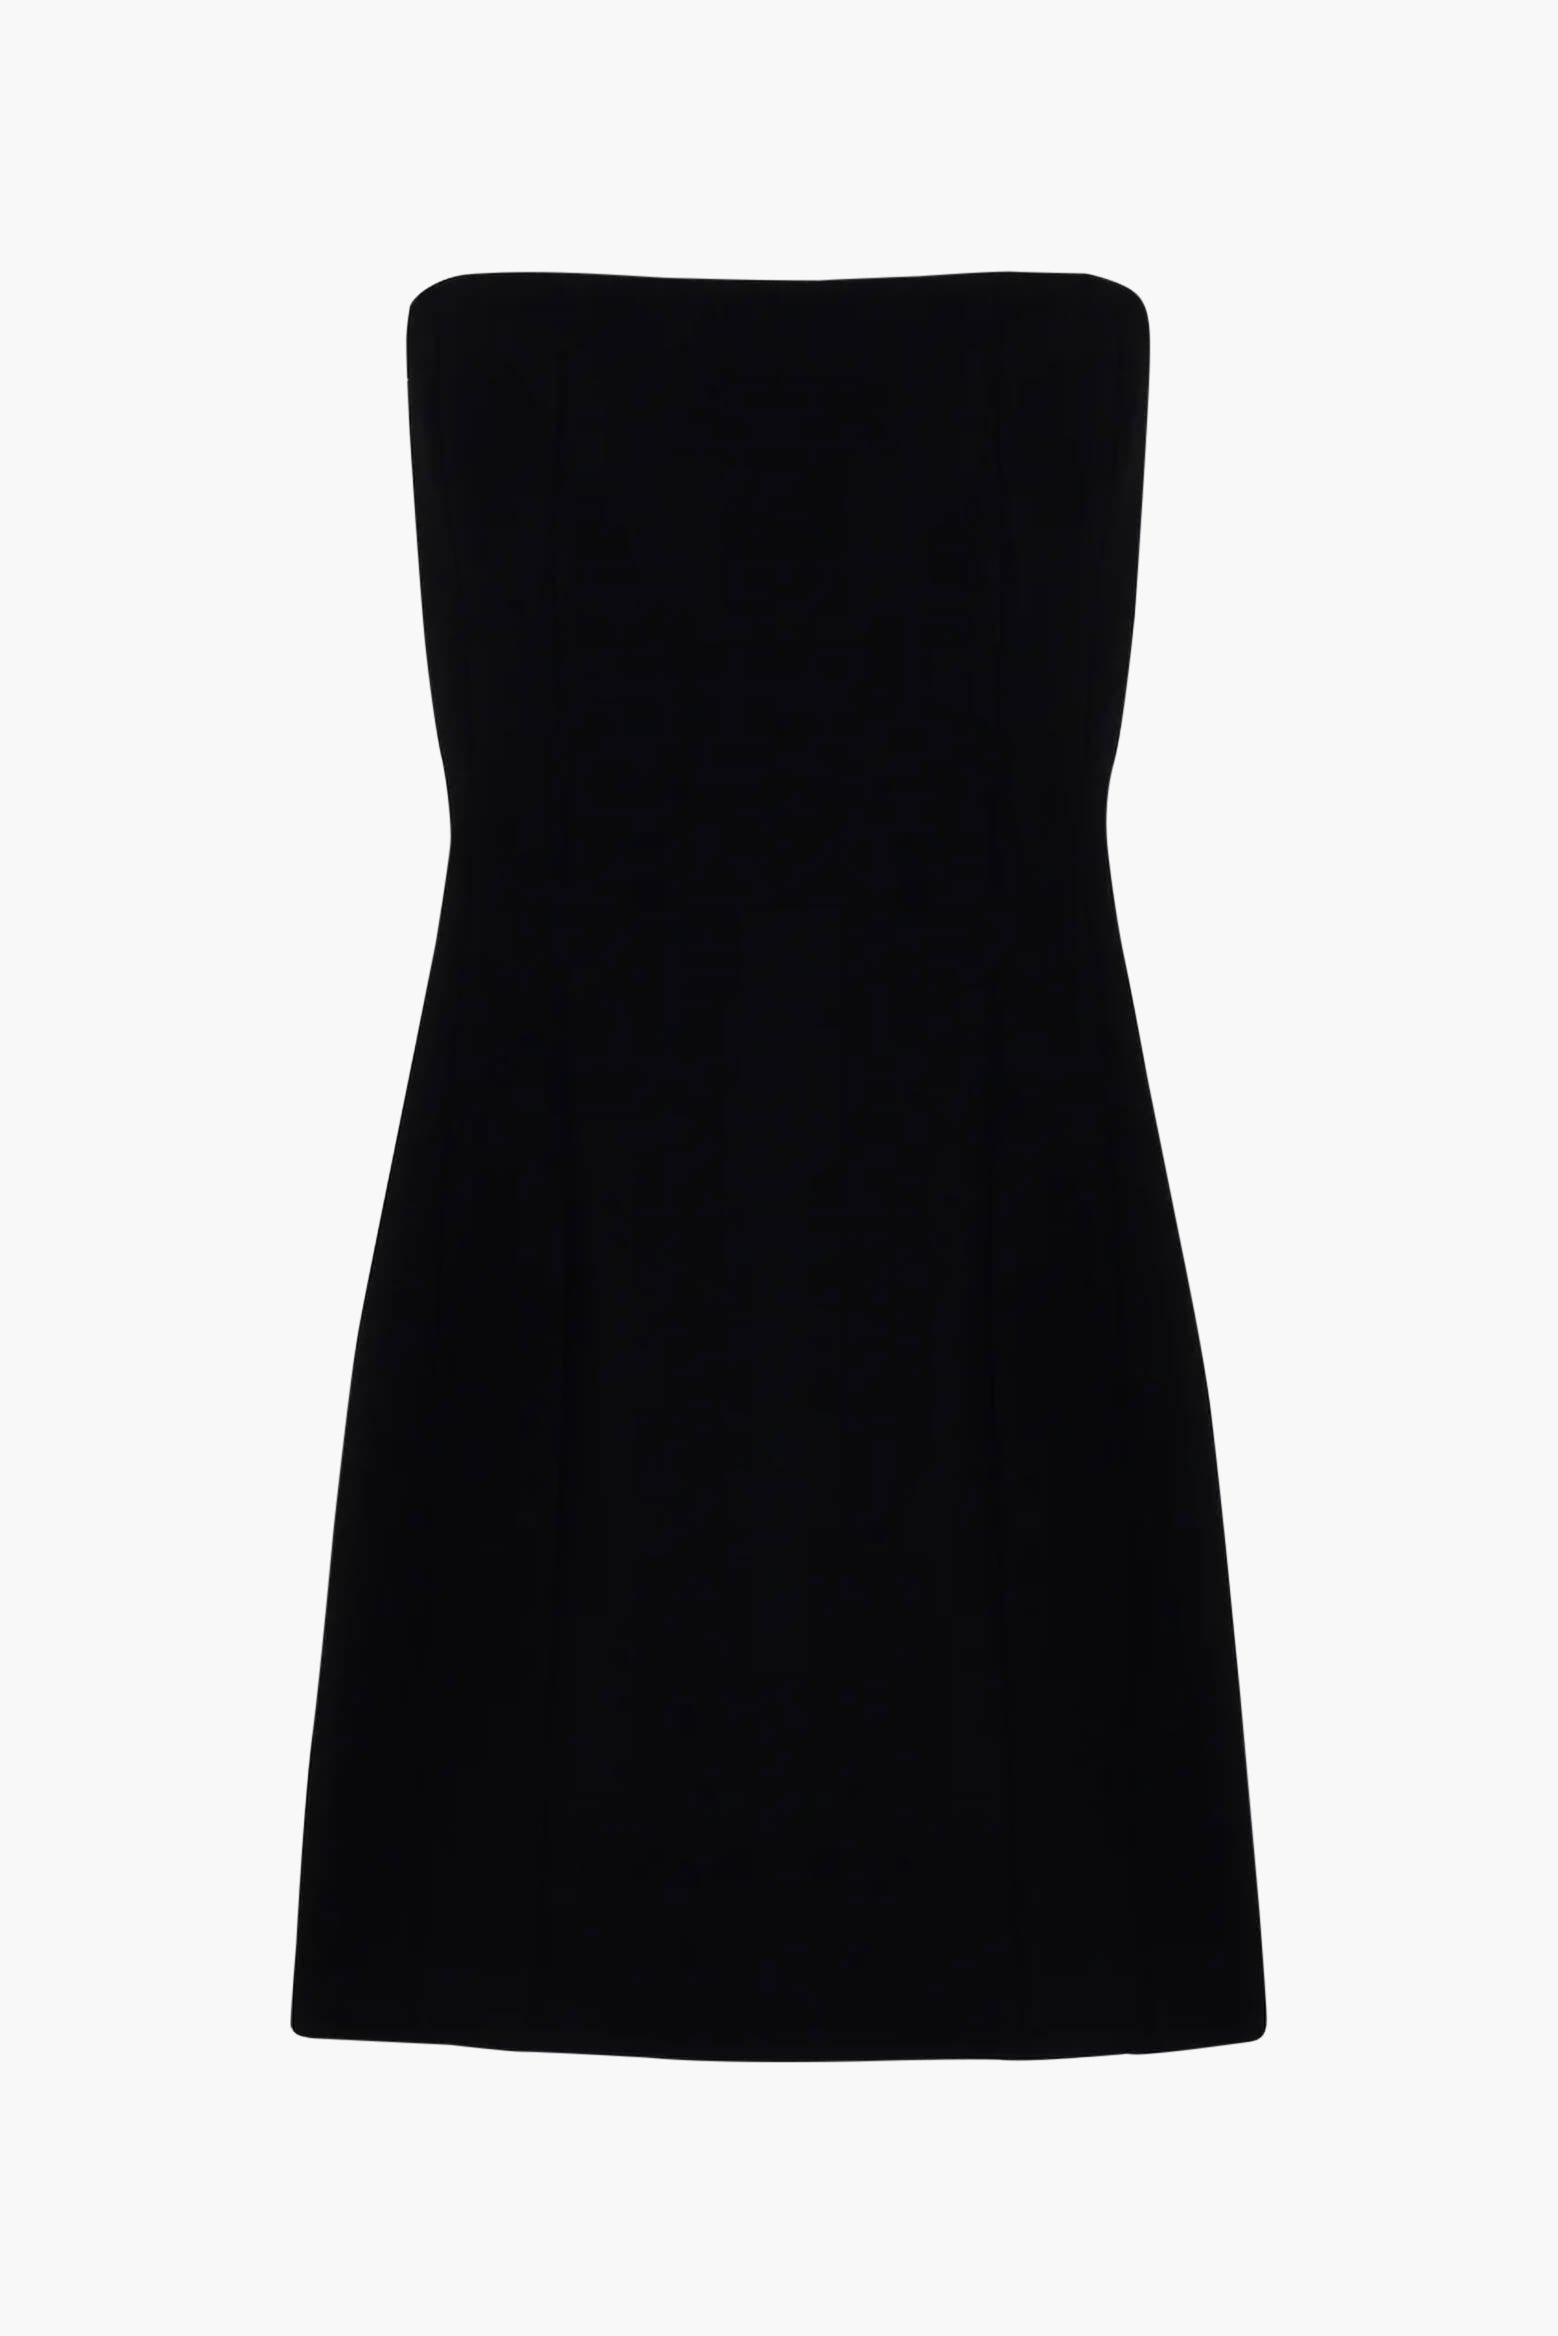 ALC Elsie Dress in Black from The New Trend